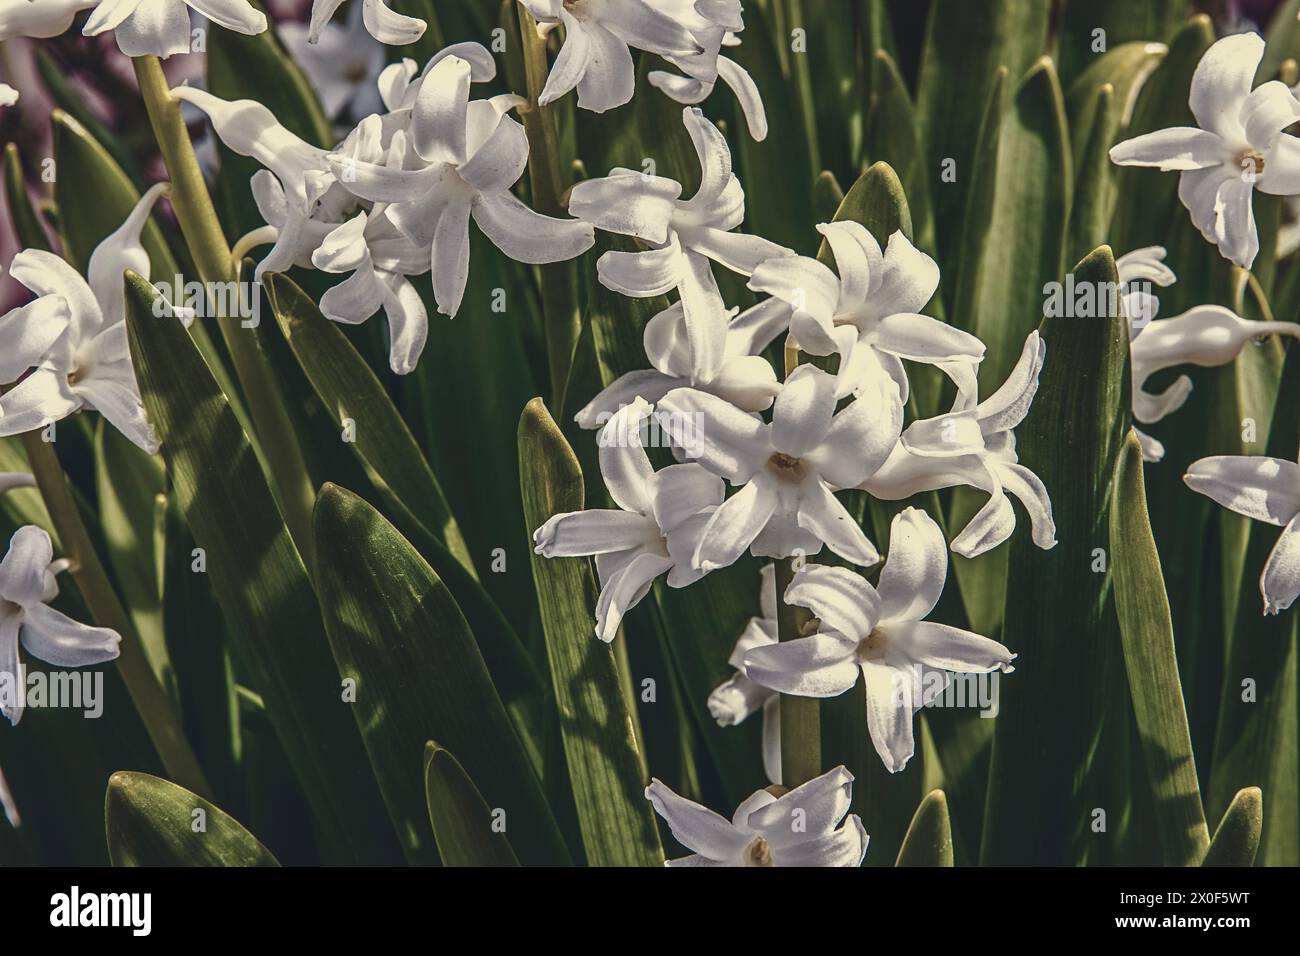 White hyacinth blossoms with green leaves Stock Photo